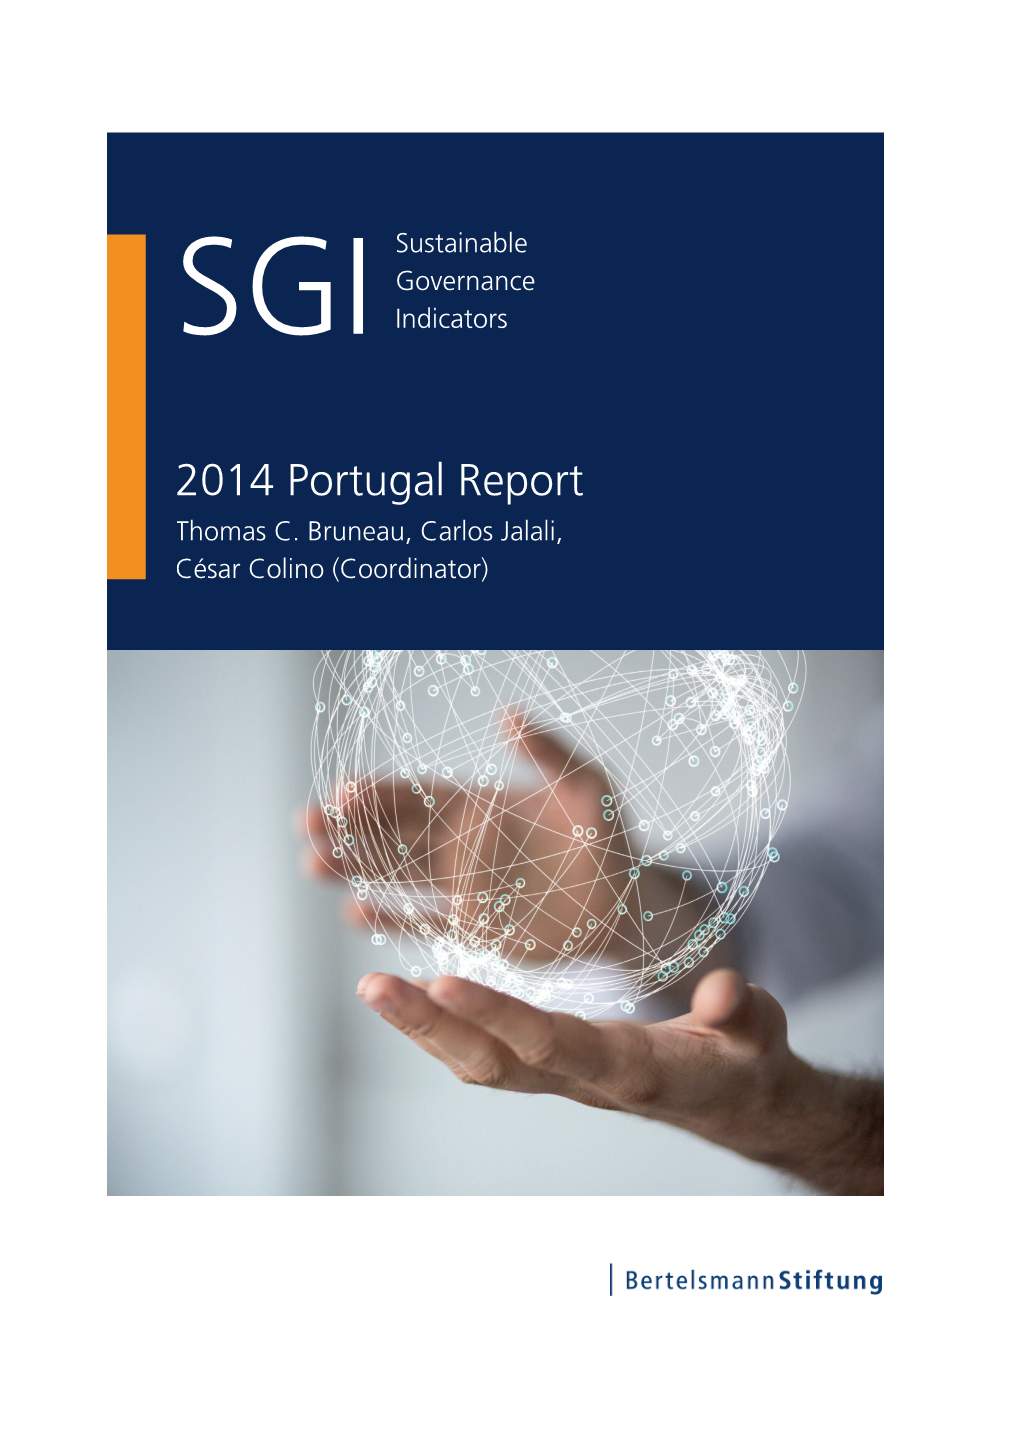 2014 Portugal Country Report | SGI Sustainable Governance Indicators